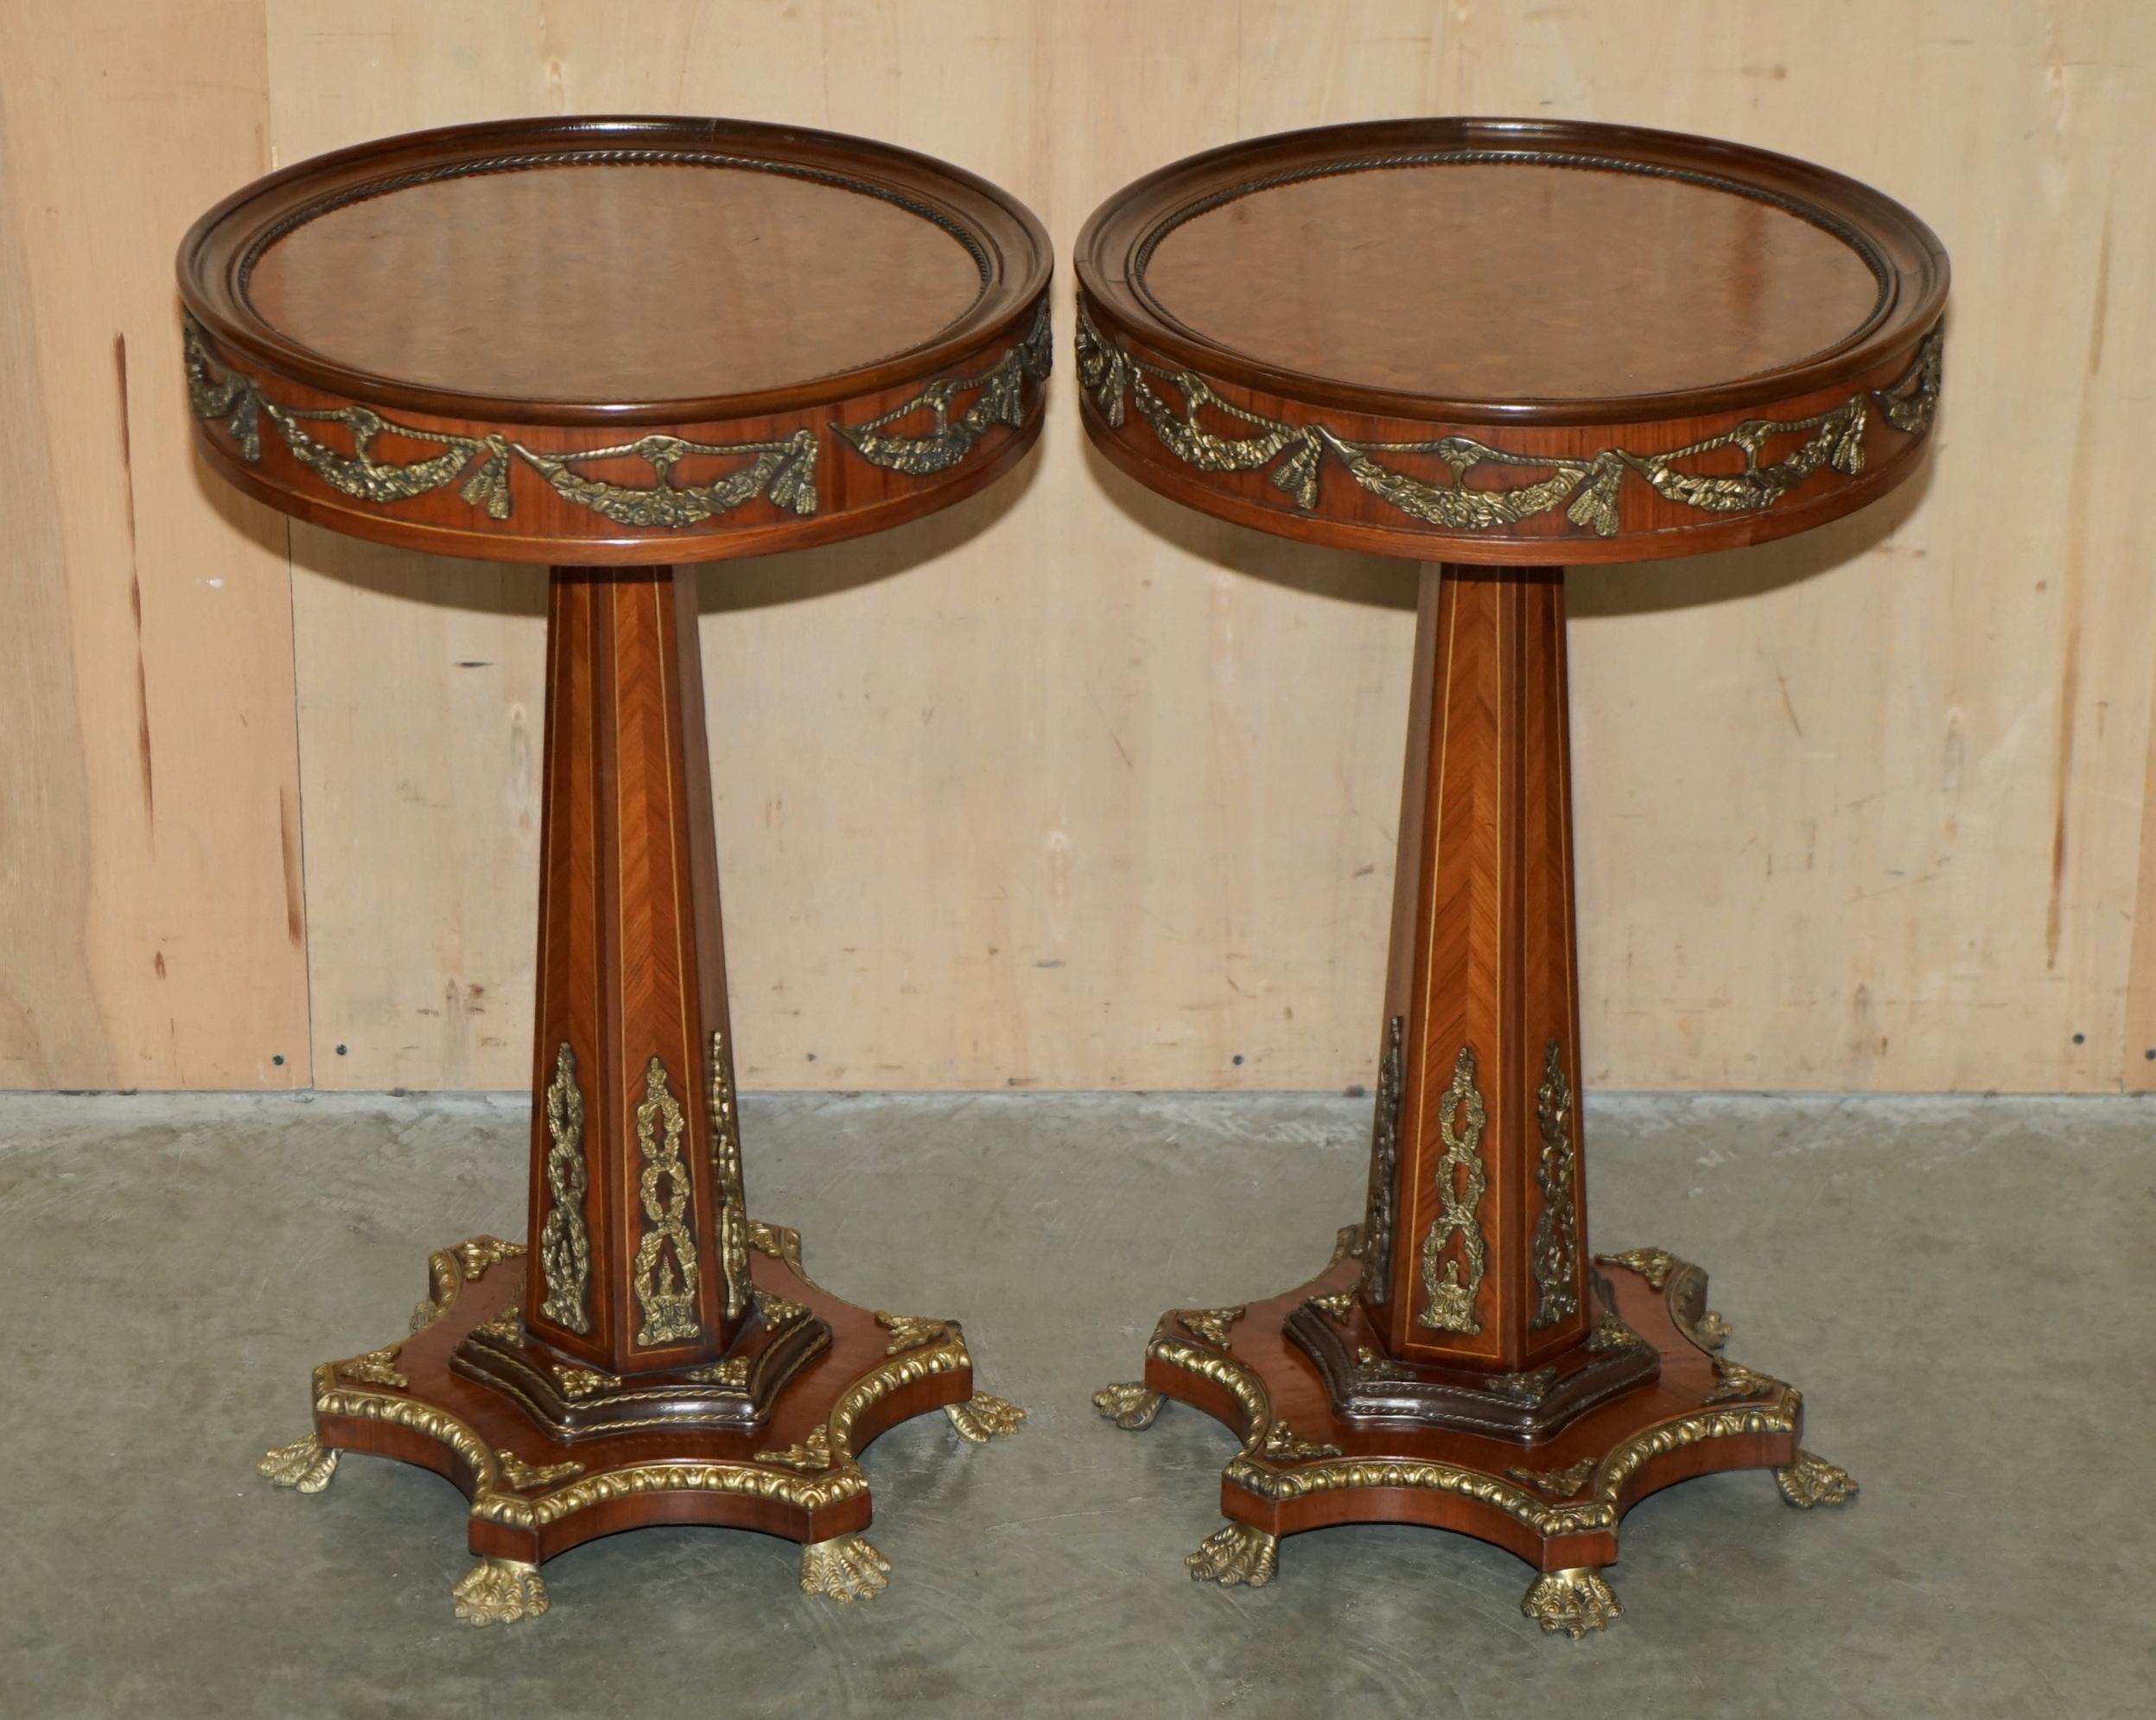 Royal House Antiques

Royal House Antiques is delighted to offer for sale this absolutely exquisite pair of Walnut tables with ornate Gilt brass detailing, Lion's hairy paw feet and Parquetry table tops 

Please note the delivery fee listed is just